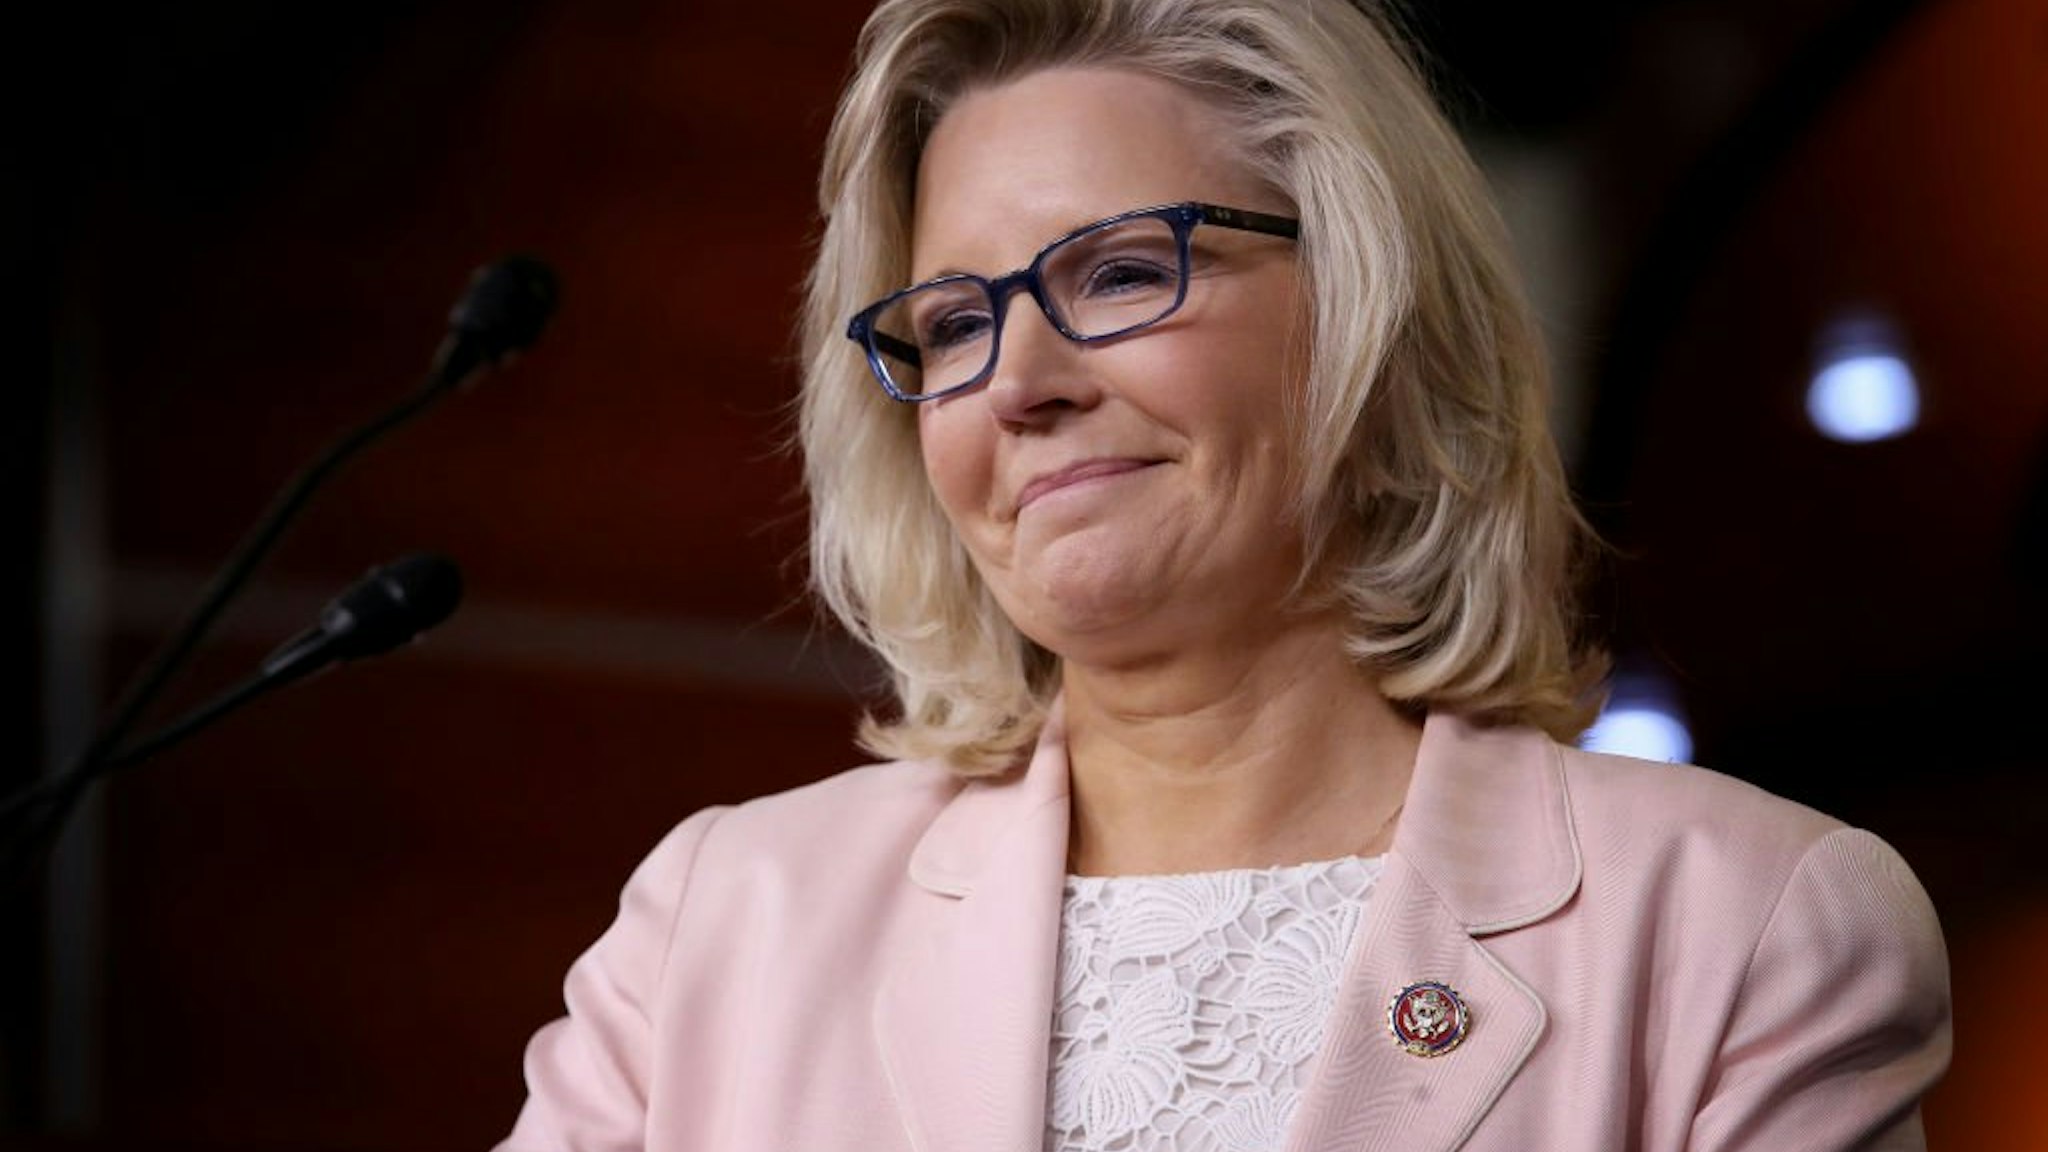 Liz Cheney (R-WY) answers questions during a press conference at the U.S. Capitol